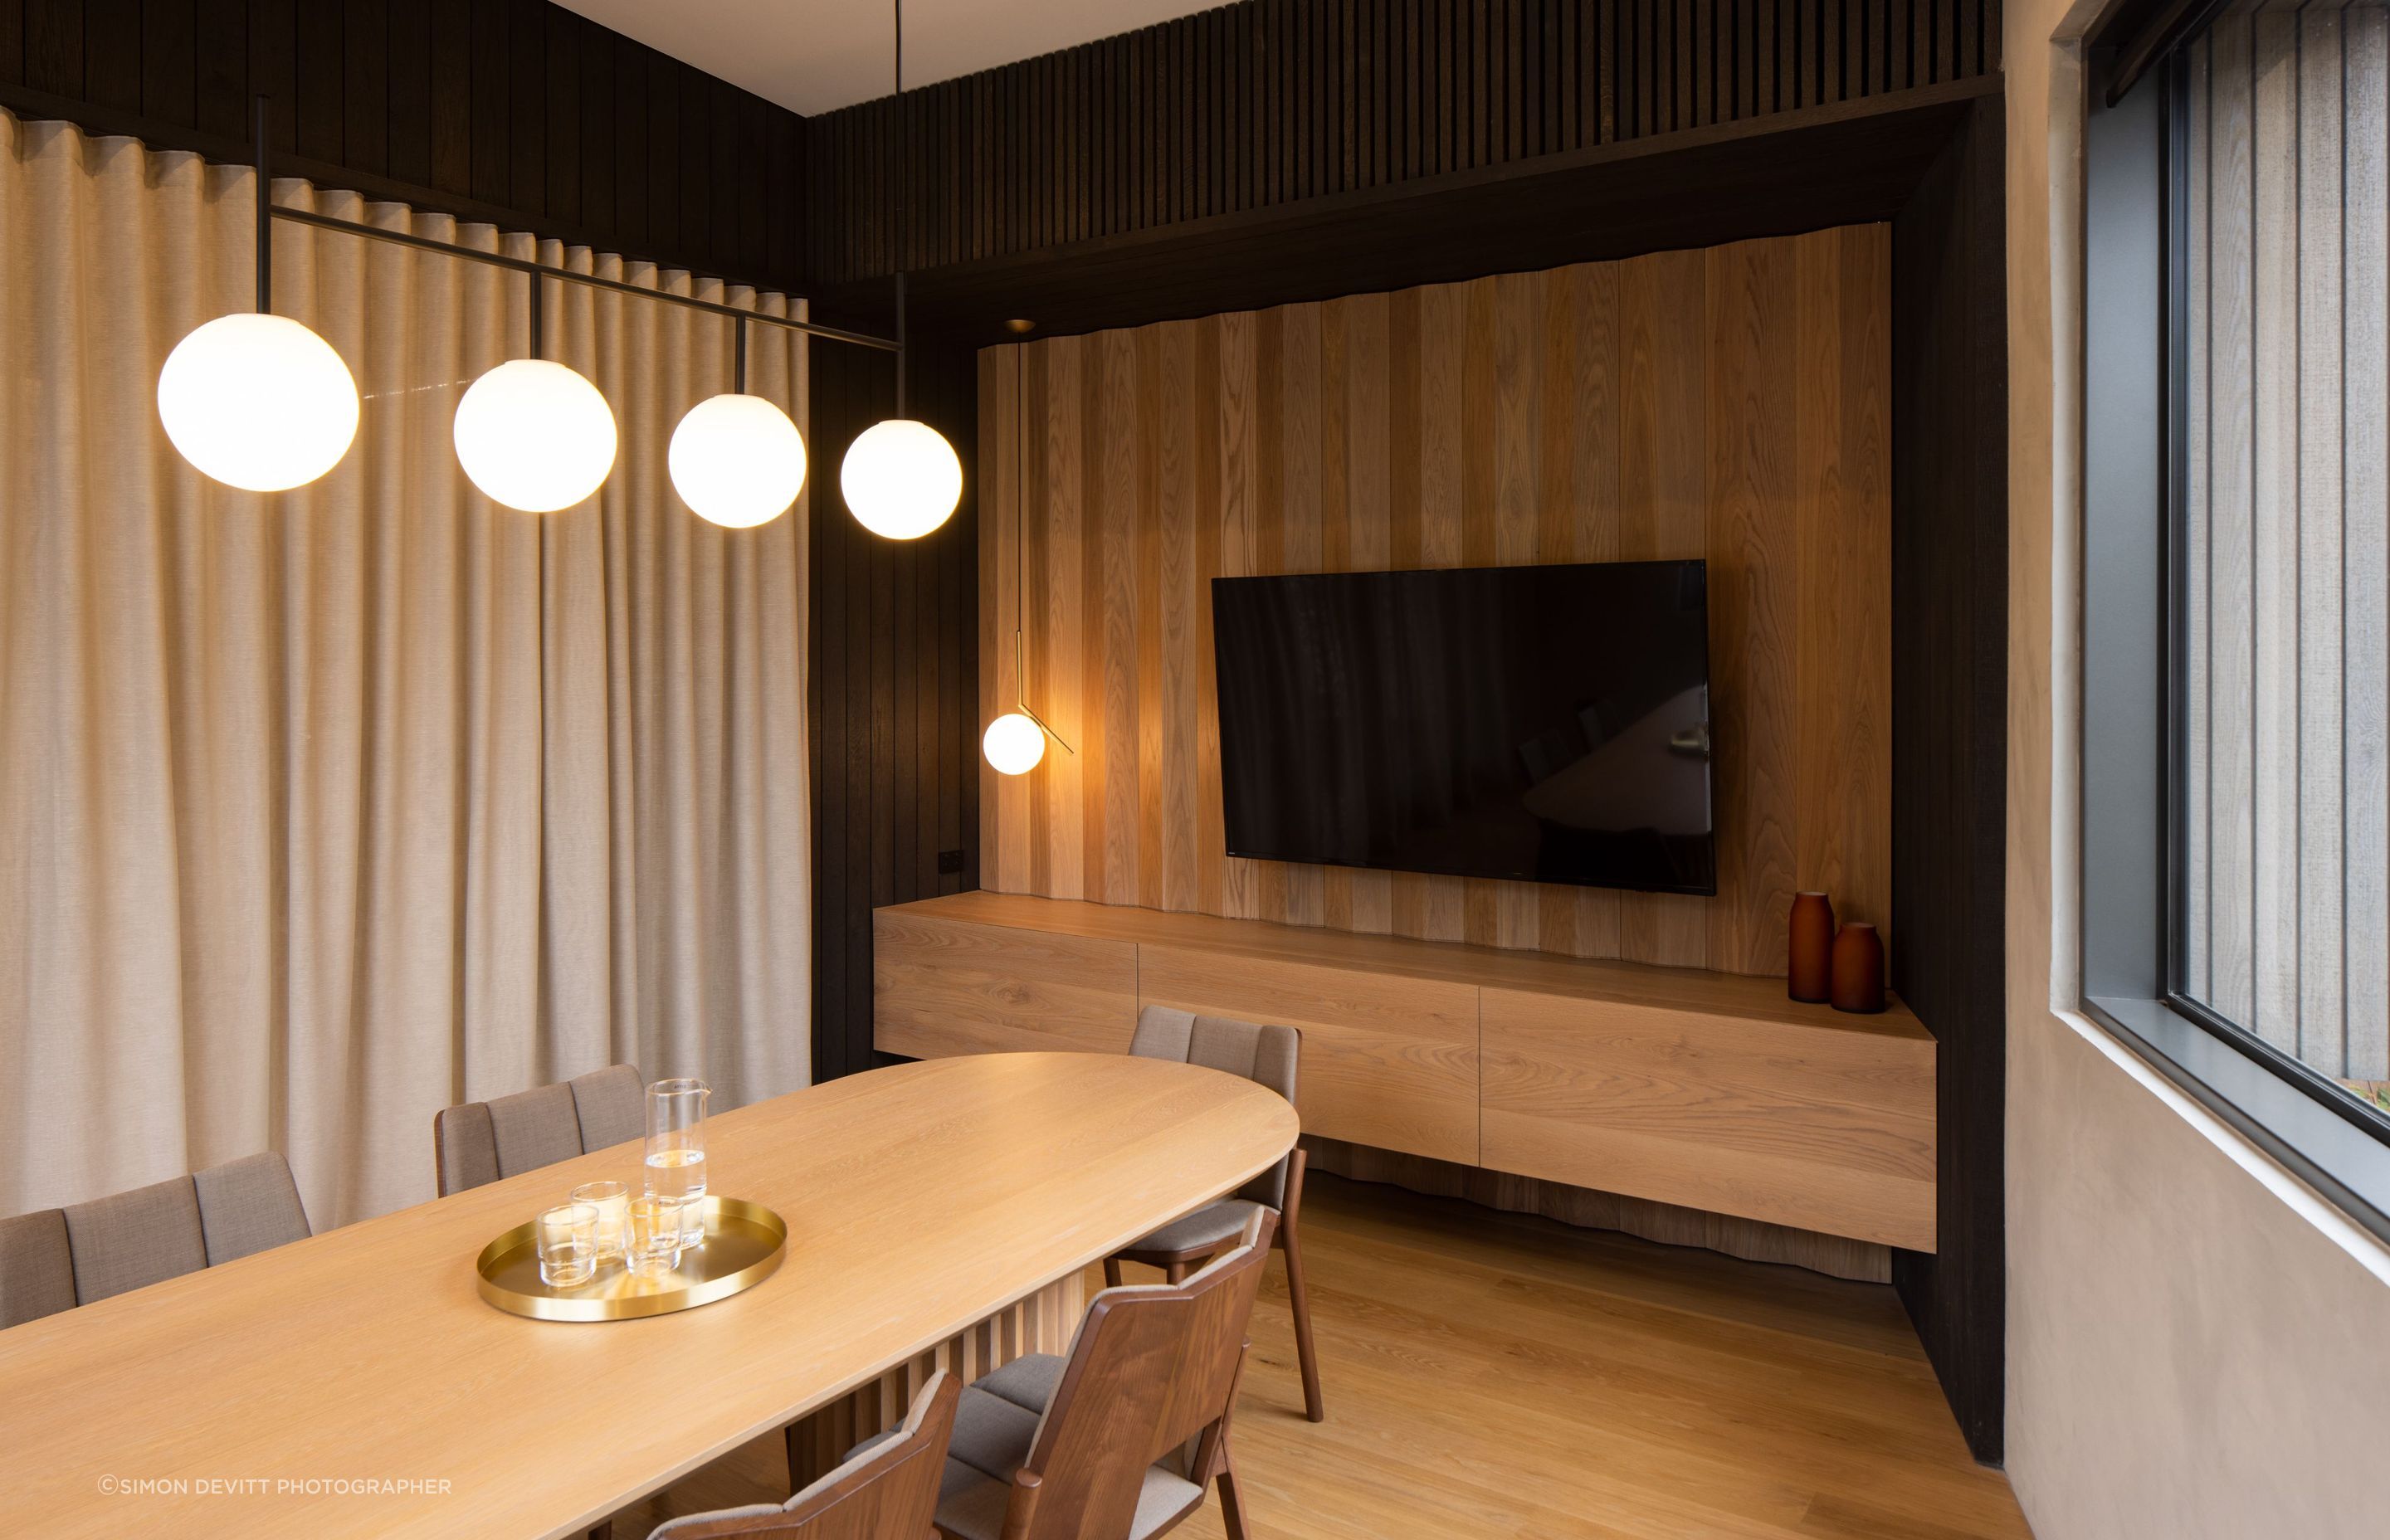 The boardroom table was custom designed to echo the faceted detail of the wall panelling. “We worked quite closely with the cabinetmaker on how that could be achieved,” says Roy.